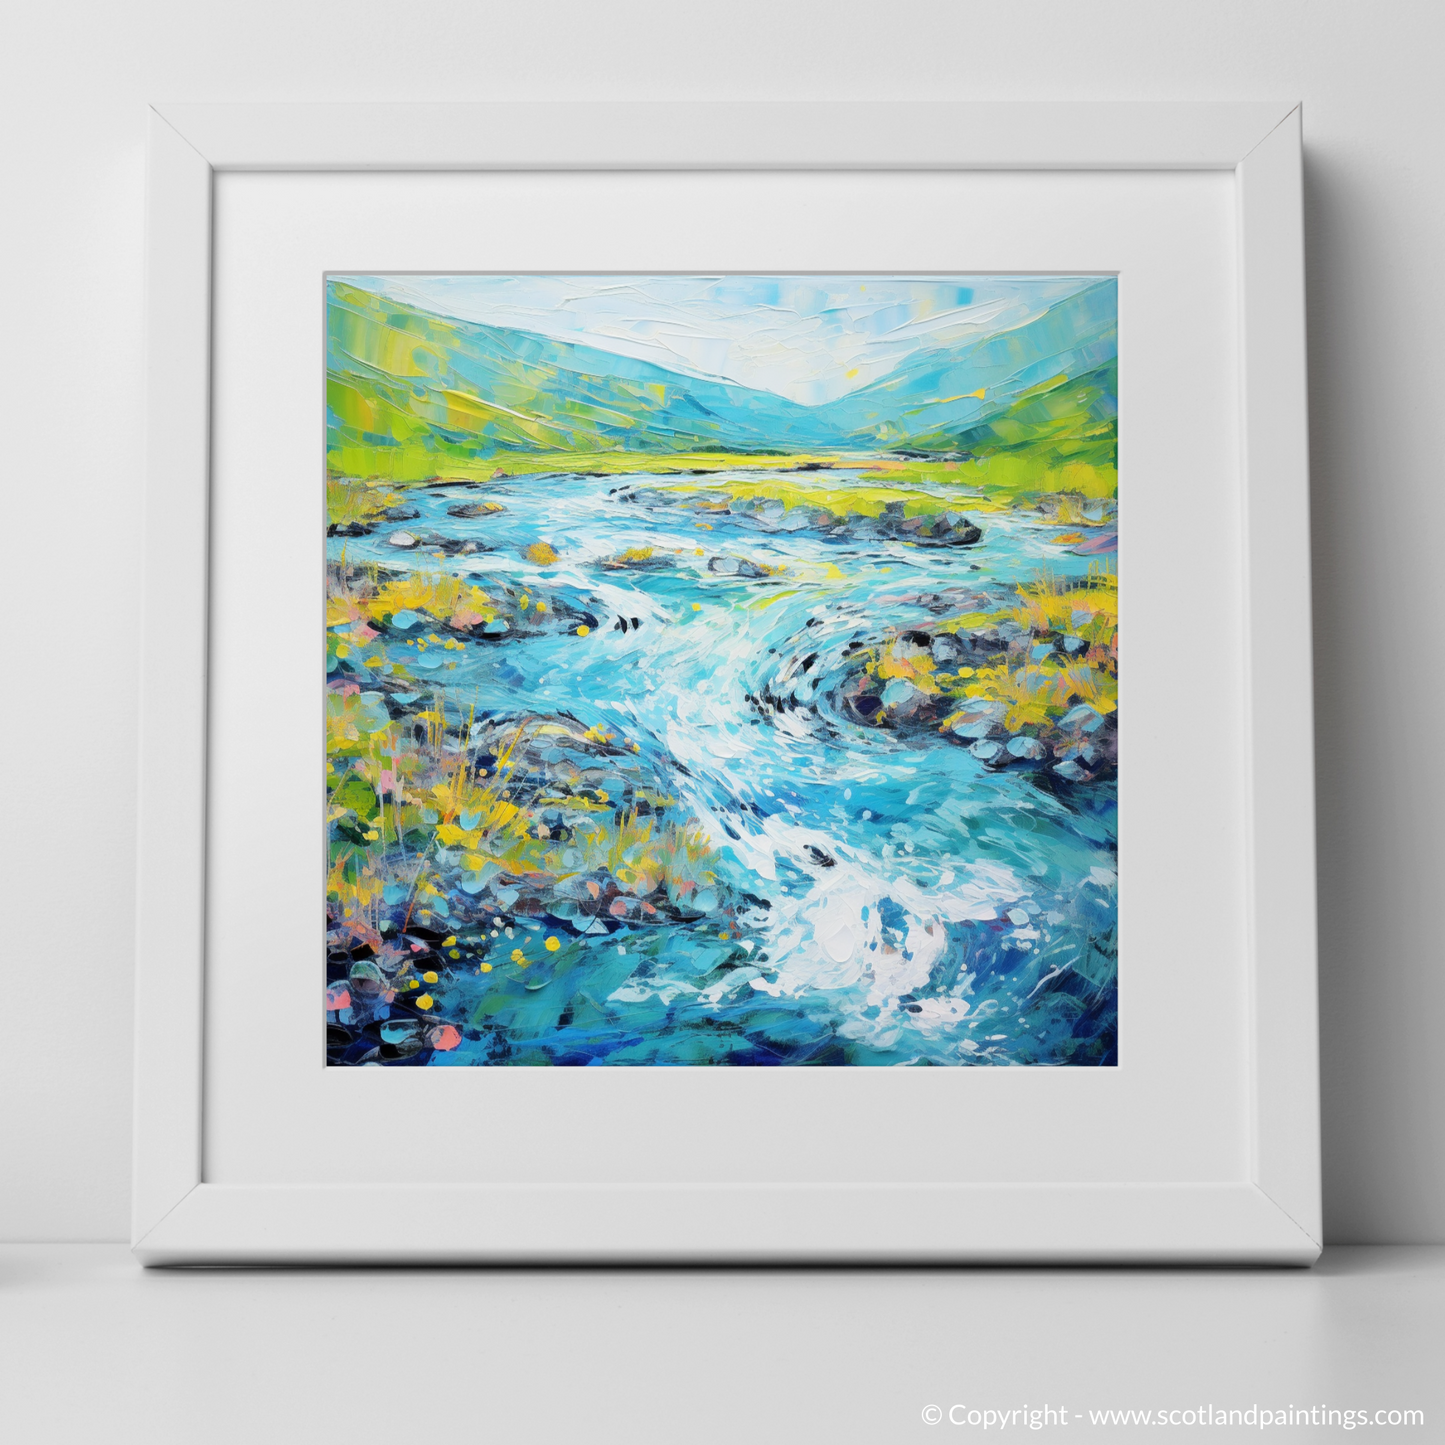 Art Print of River Etive, Argyll and Bute in summer with a white frame